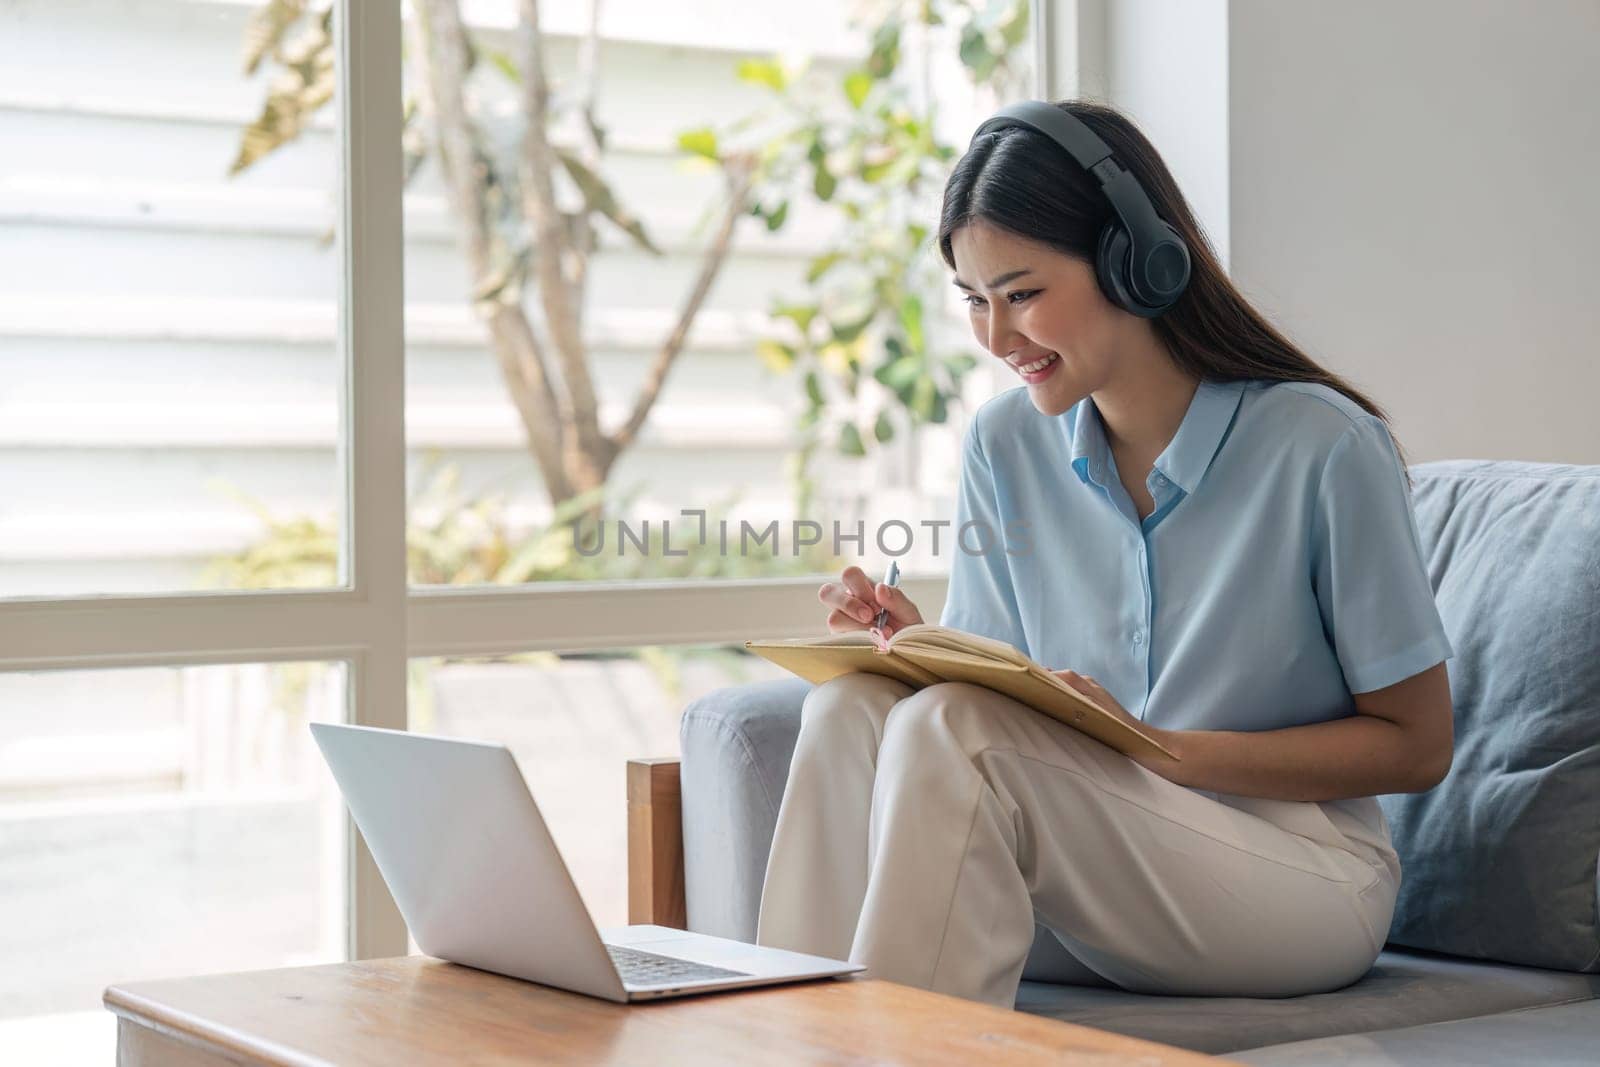 woman taking notes in notebook while using laptop at home in living room. Focused lady writing in notepad.